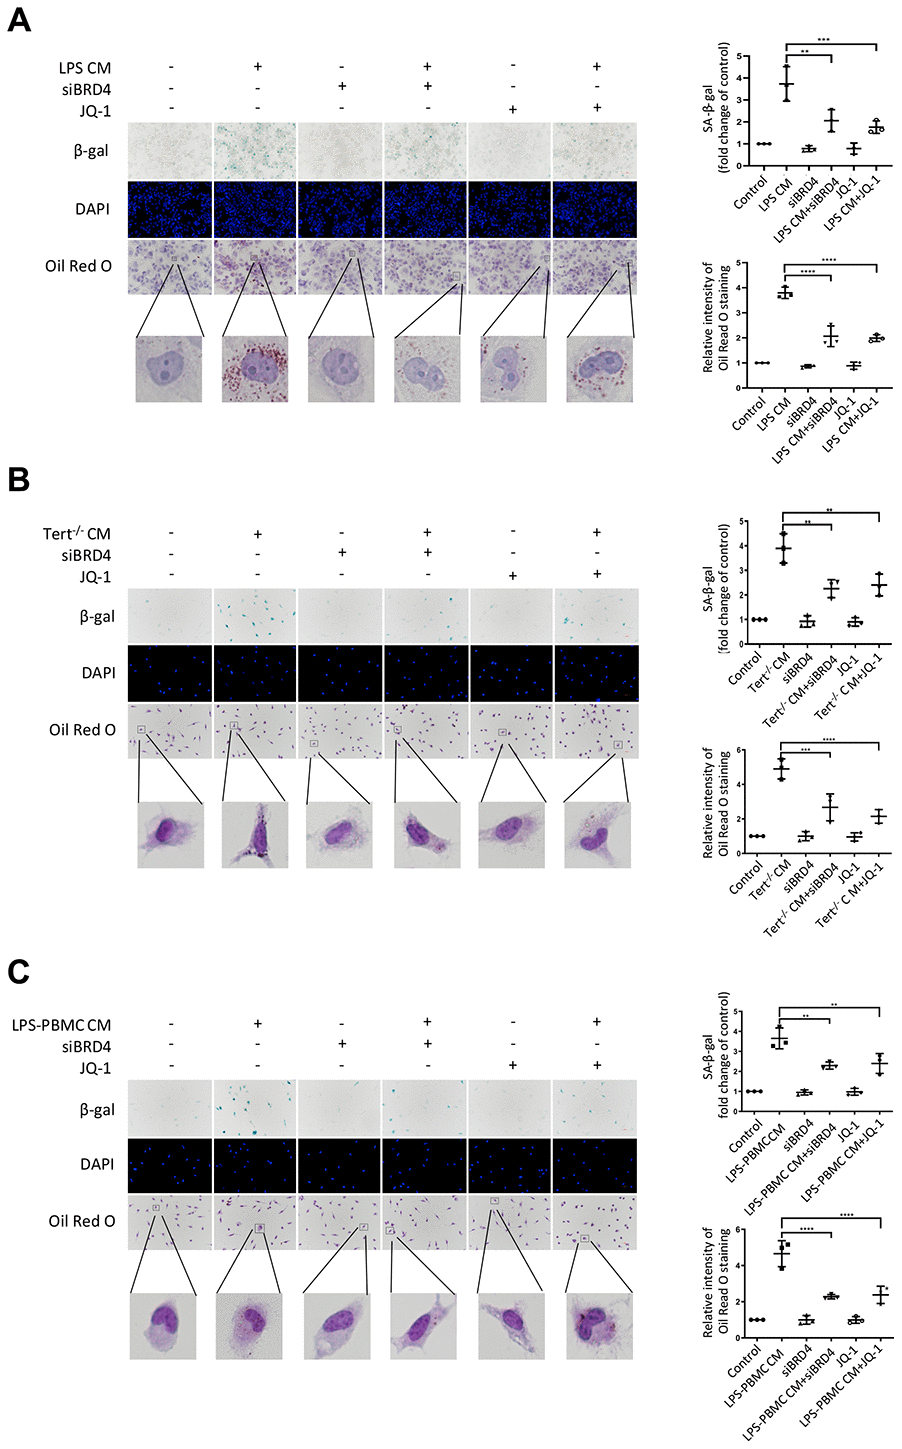 BRD4-induced inflammation reinforces the senescent phenotype via paracrine pathways. (A) THP-1 macrophages were cultured with LPS-induced senescent cell-derived conditioned medium for 24 h with or without siBRD4 or the BRD4 inhibitor JQ-1 (1 μM). Representative SA-β-gal was used to detect cell senescence, and Oil Red O staining was used to detect lipid accumulation in the cells. Scale bar, 50 μm. (B, C) The peritoneal macrophages from the Tert-/- mice and human peripheral blood mononuclear cells (PBMCs) were cultured with the corresponding conditioned medium for 24 h. Representative SA-β-gal was used to detect cell senescence, and Oil Red O staining was used to detect lipid accumulation in the cells. Scale bar, 50 μm. The data all represent measured data presented as the mean ± SD. Comparisons between multiple groups were performed using one-way ANOVA, followed by Tukey’s post-hoc test. The experiment was repeated three times. Significant differences among different groups are indicated as **p p -/- CM; ****p 